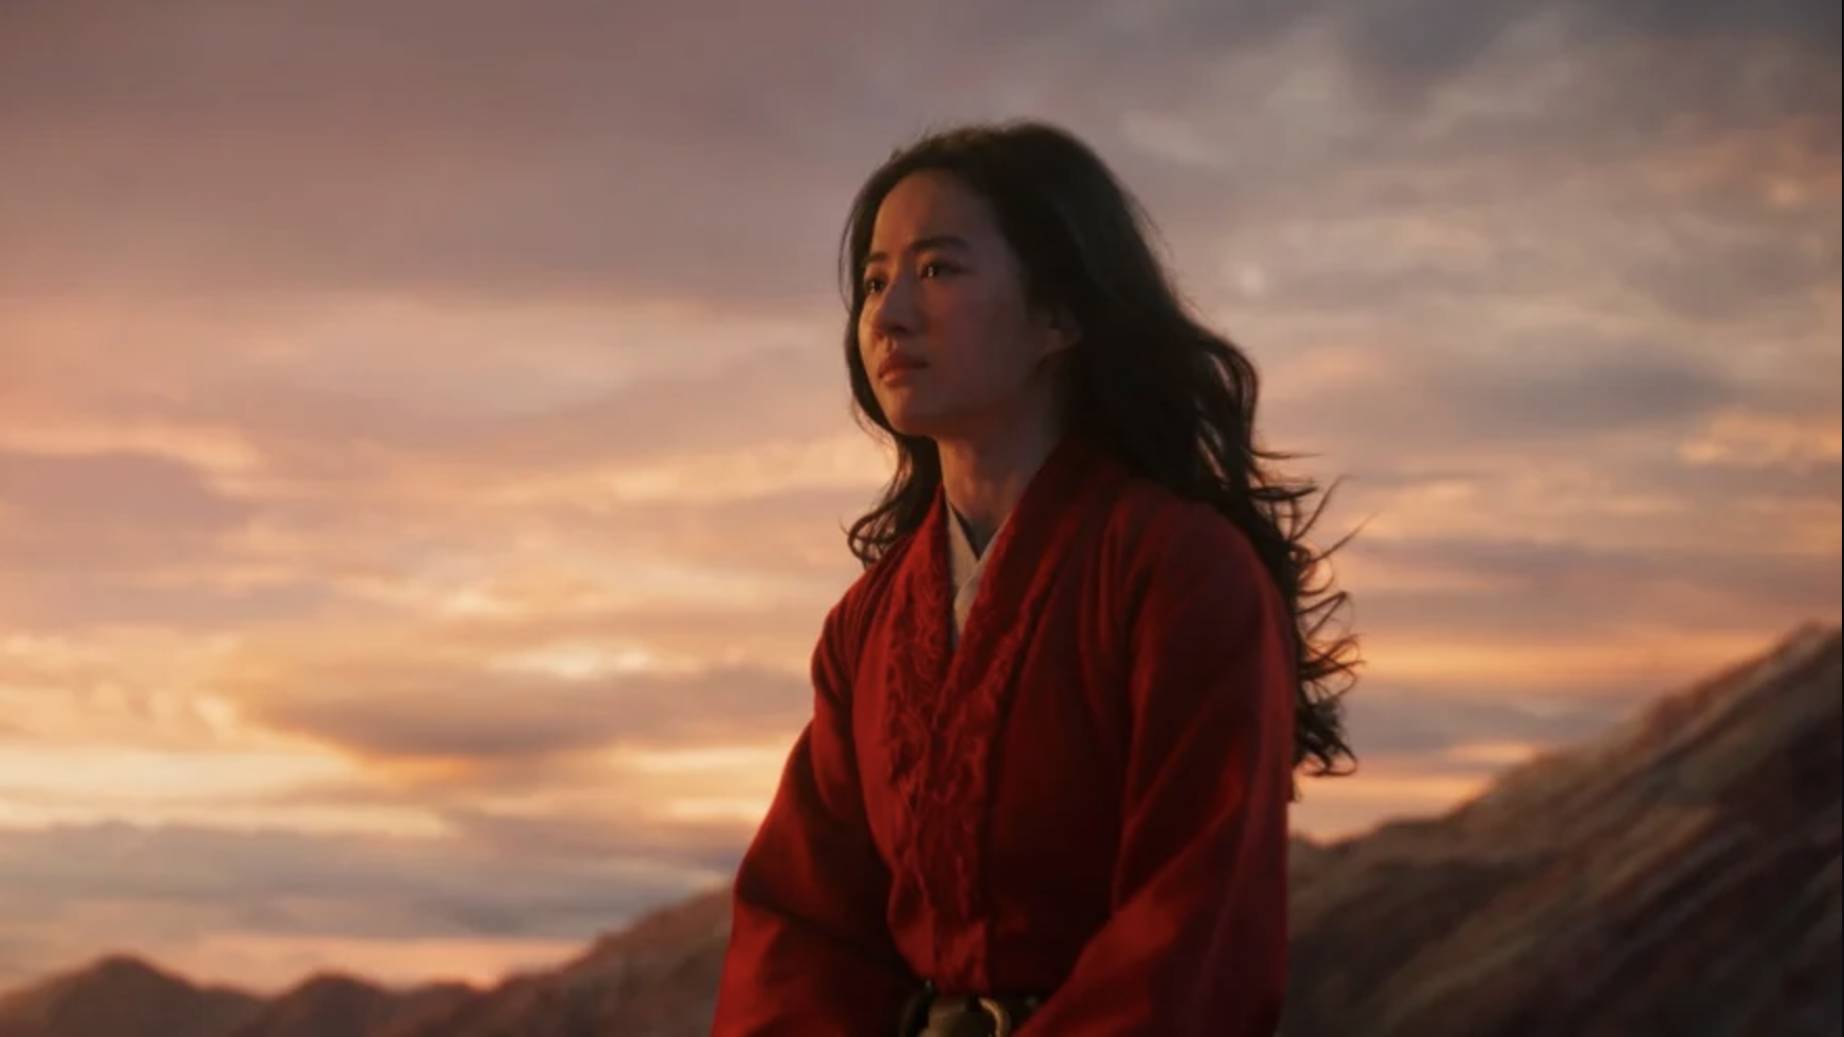 disney-postpones-mulan-release-again-to-late-august-due-to-covid-19-2